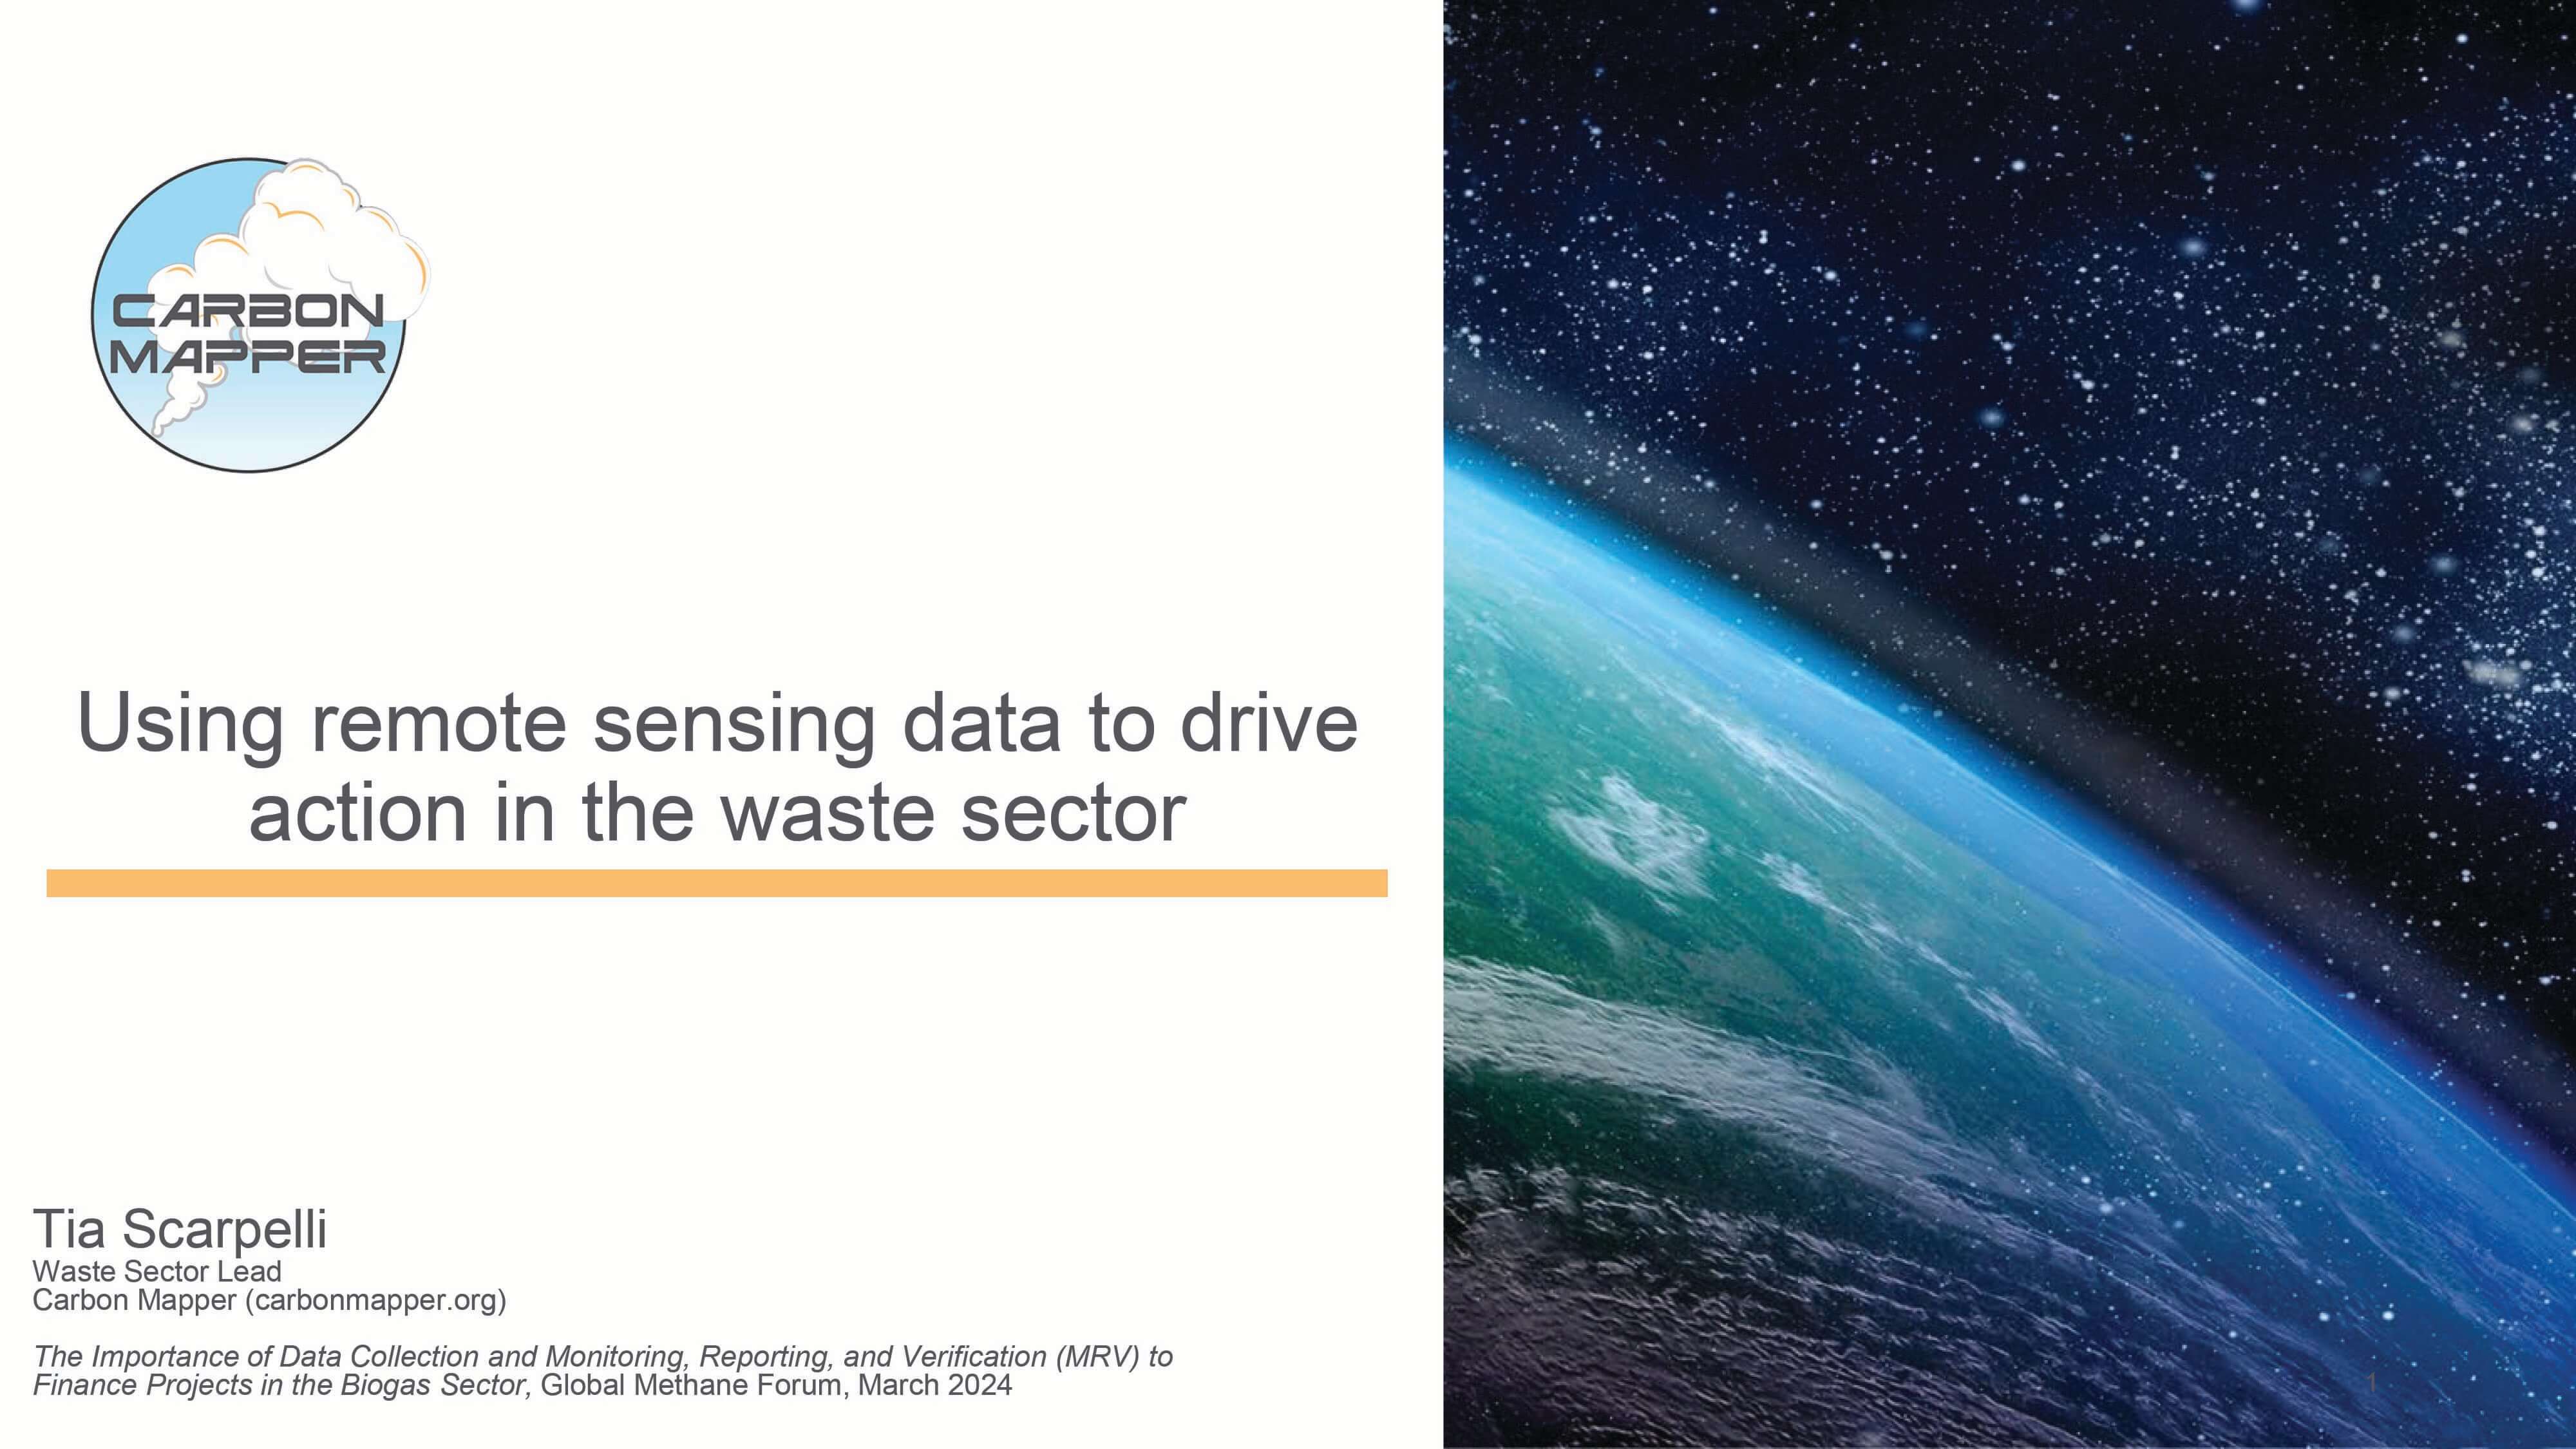 Using remote sensing data to drive action in the waste sector